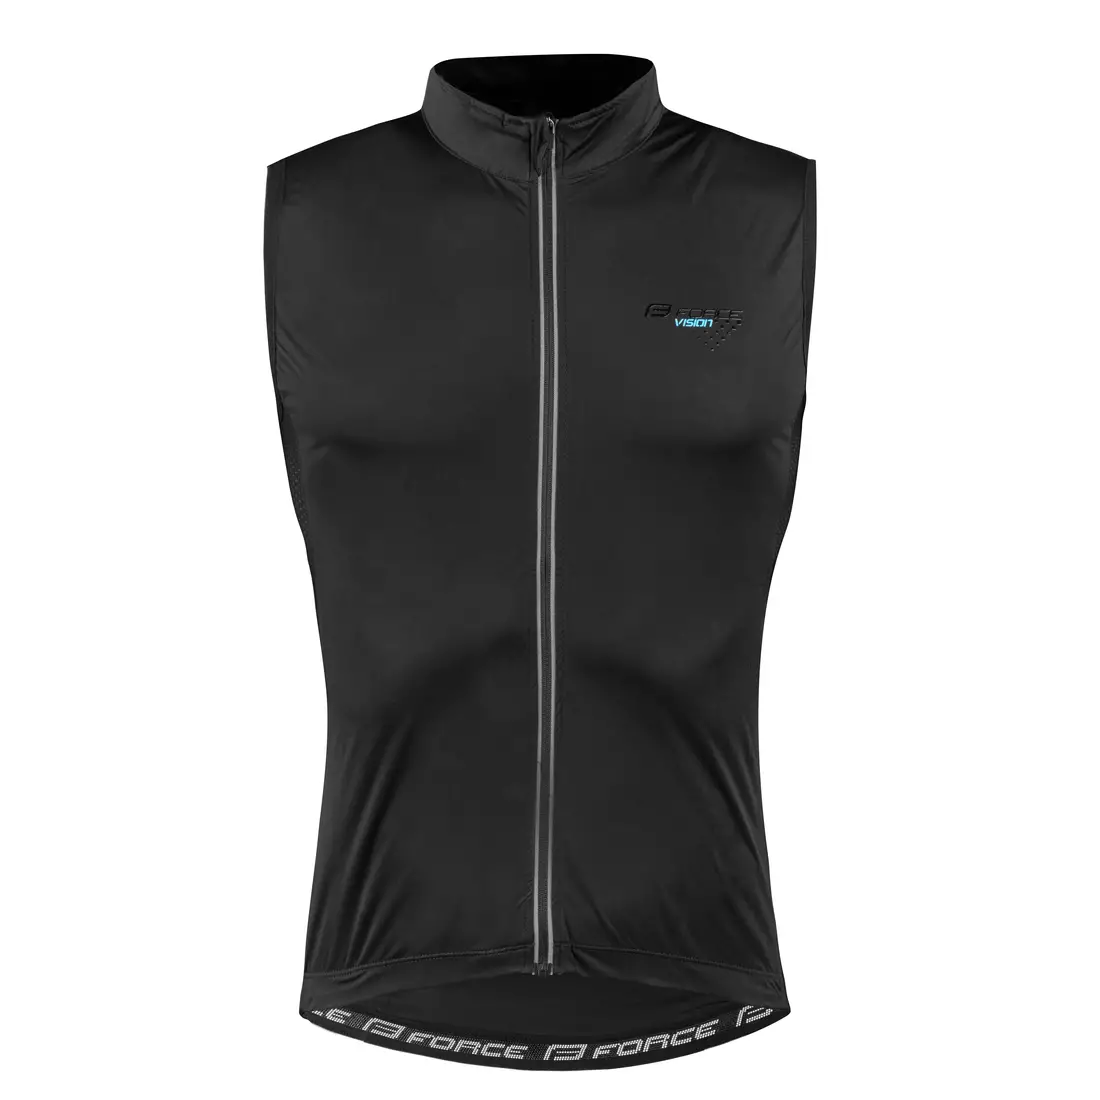 FORCE windproof cycling vest VISION black 899641